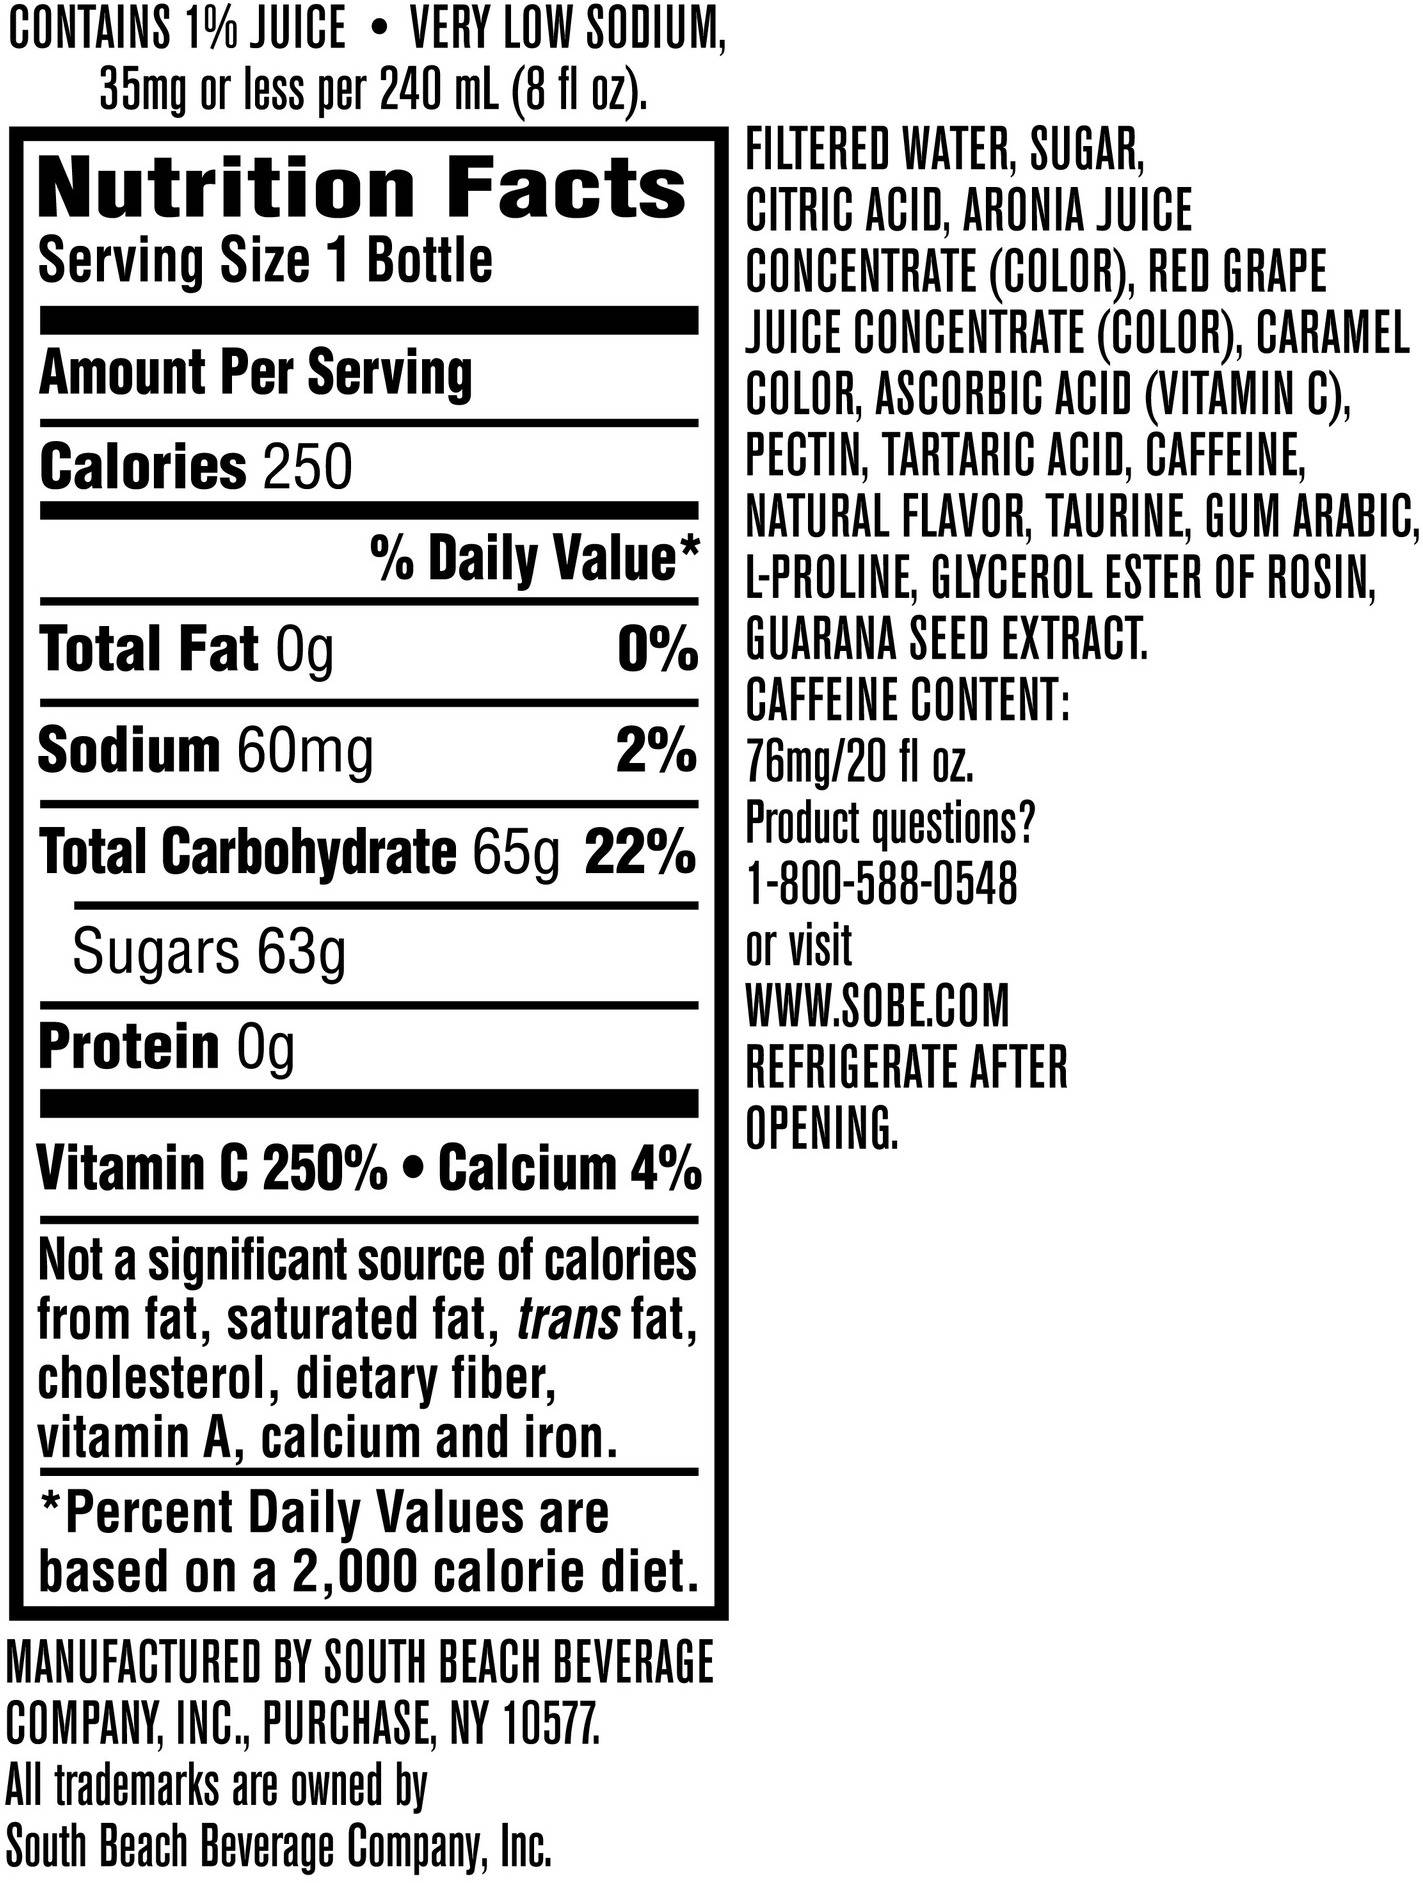 Image describing nutrition information for product SoBe Power Fruit Punch